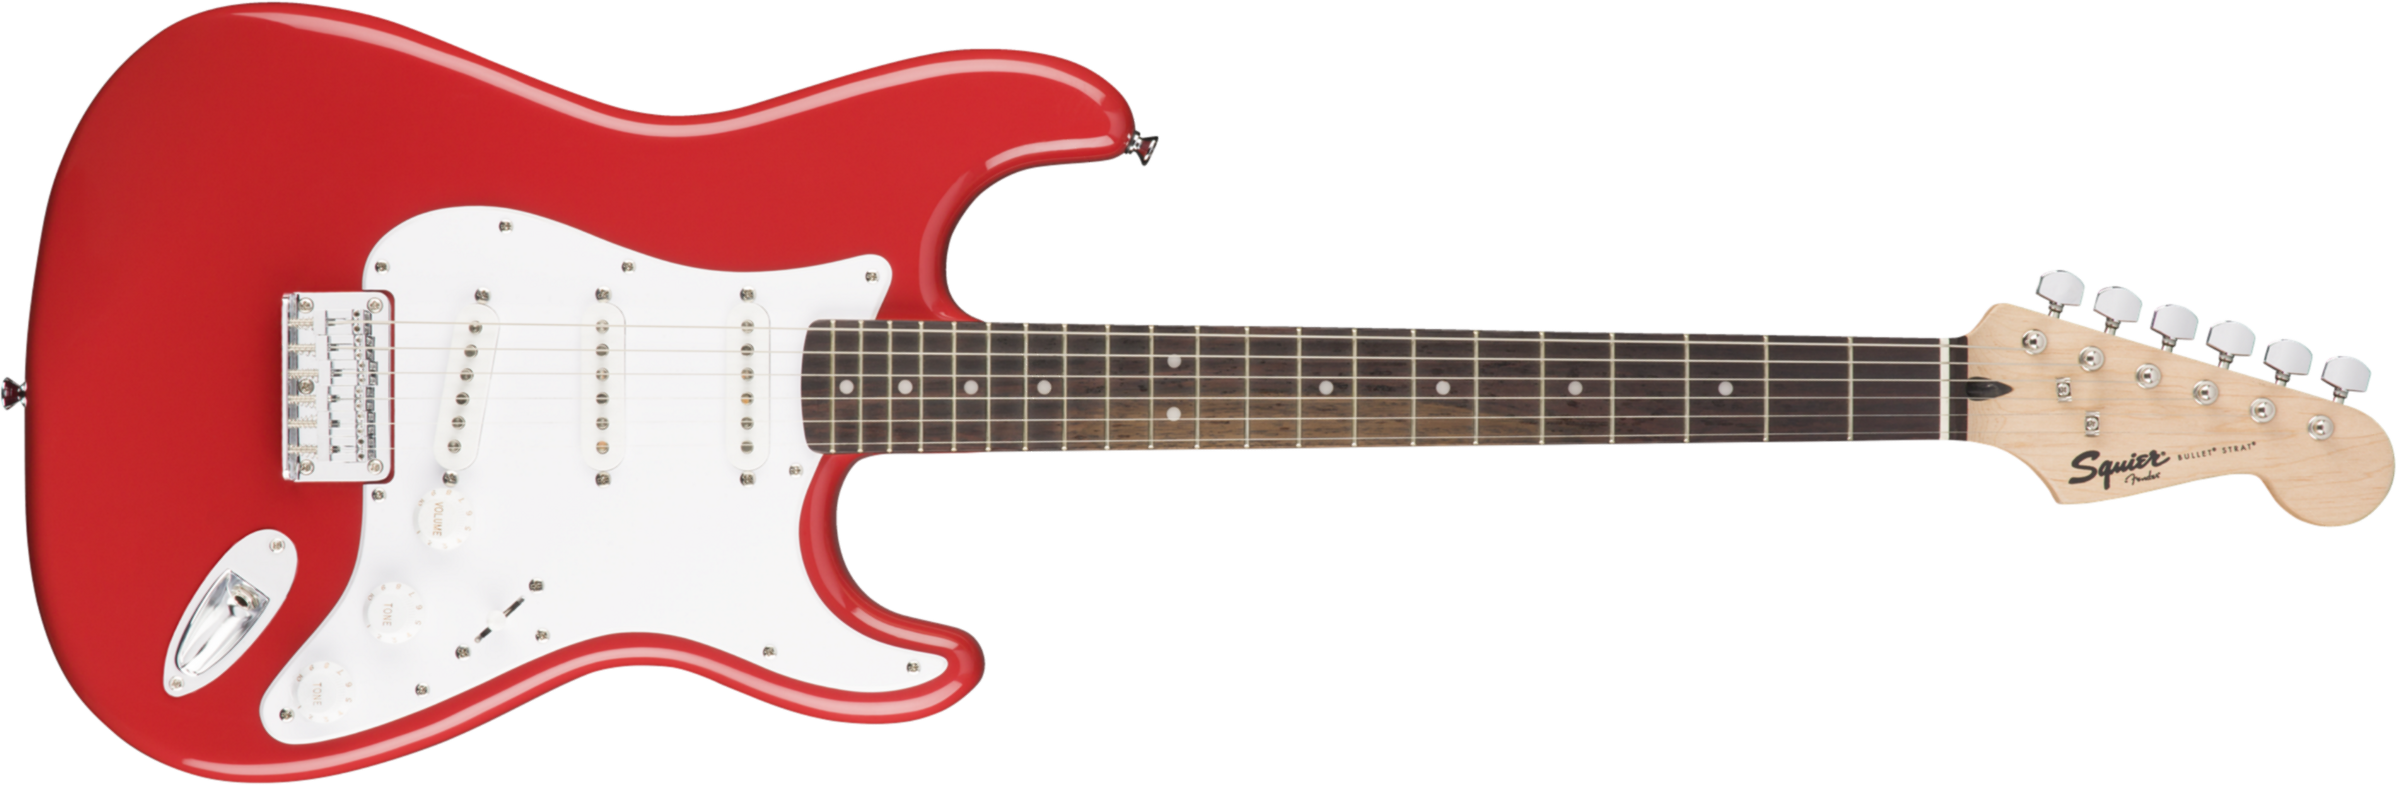 Squier Bullet Stratocaster Ht Sss (lau) - Fiesta Red - E-Gitarre in Str-Form - Main picture